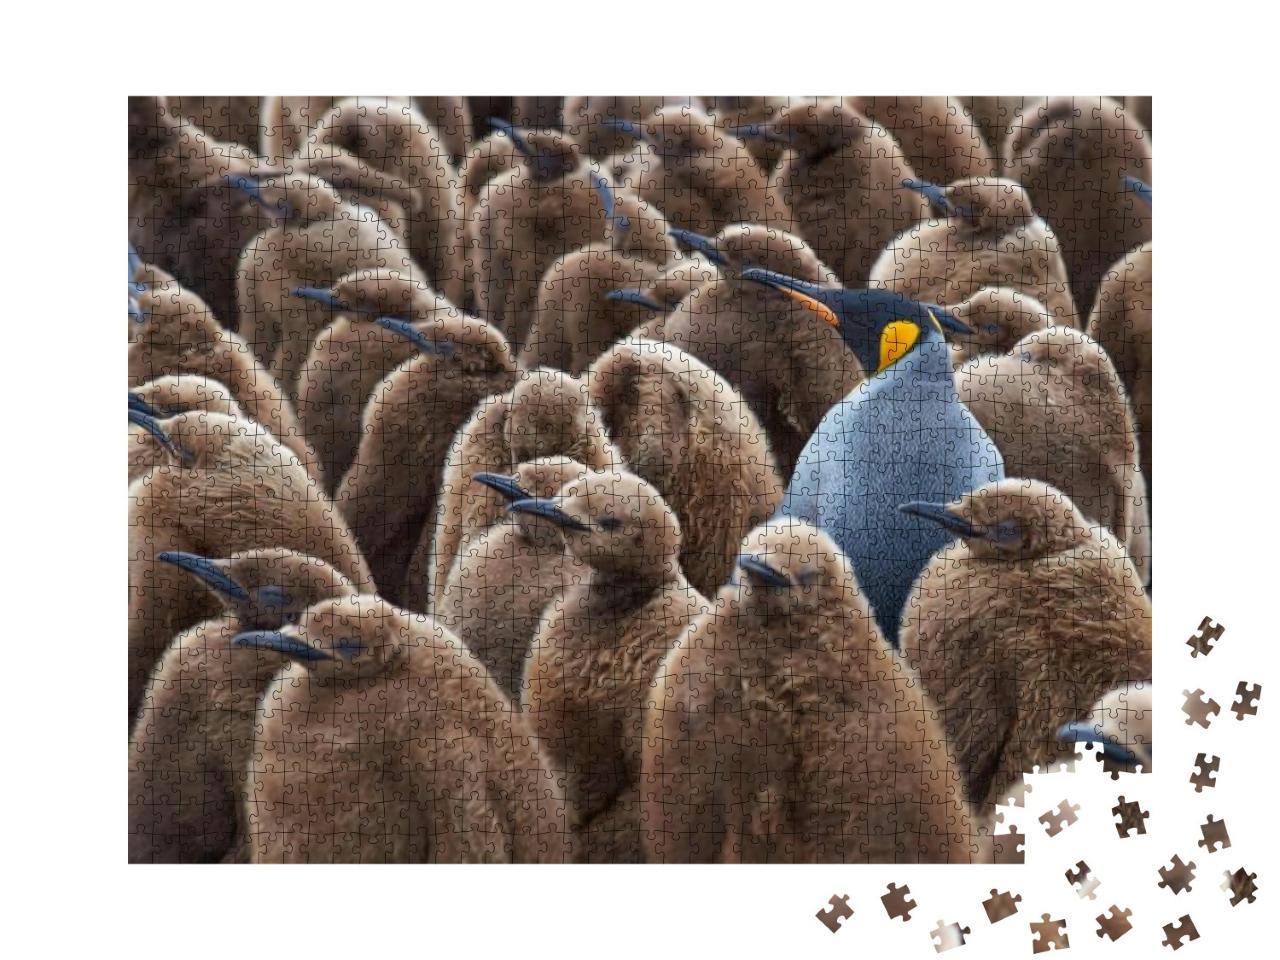 Adult King Penguin Aptenodytes Patagonicus Standing Among... Jigsaw Puzzle with 1000 pieces